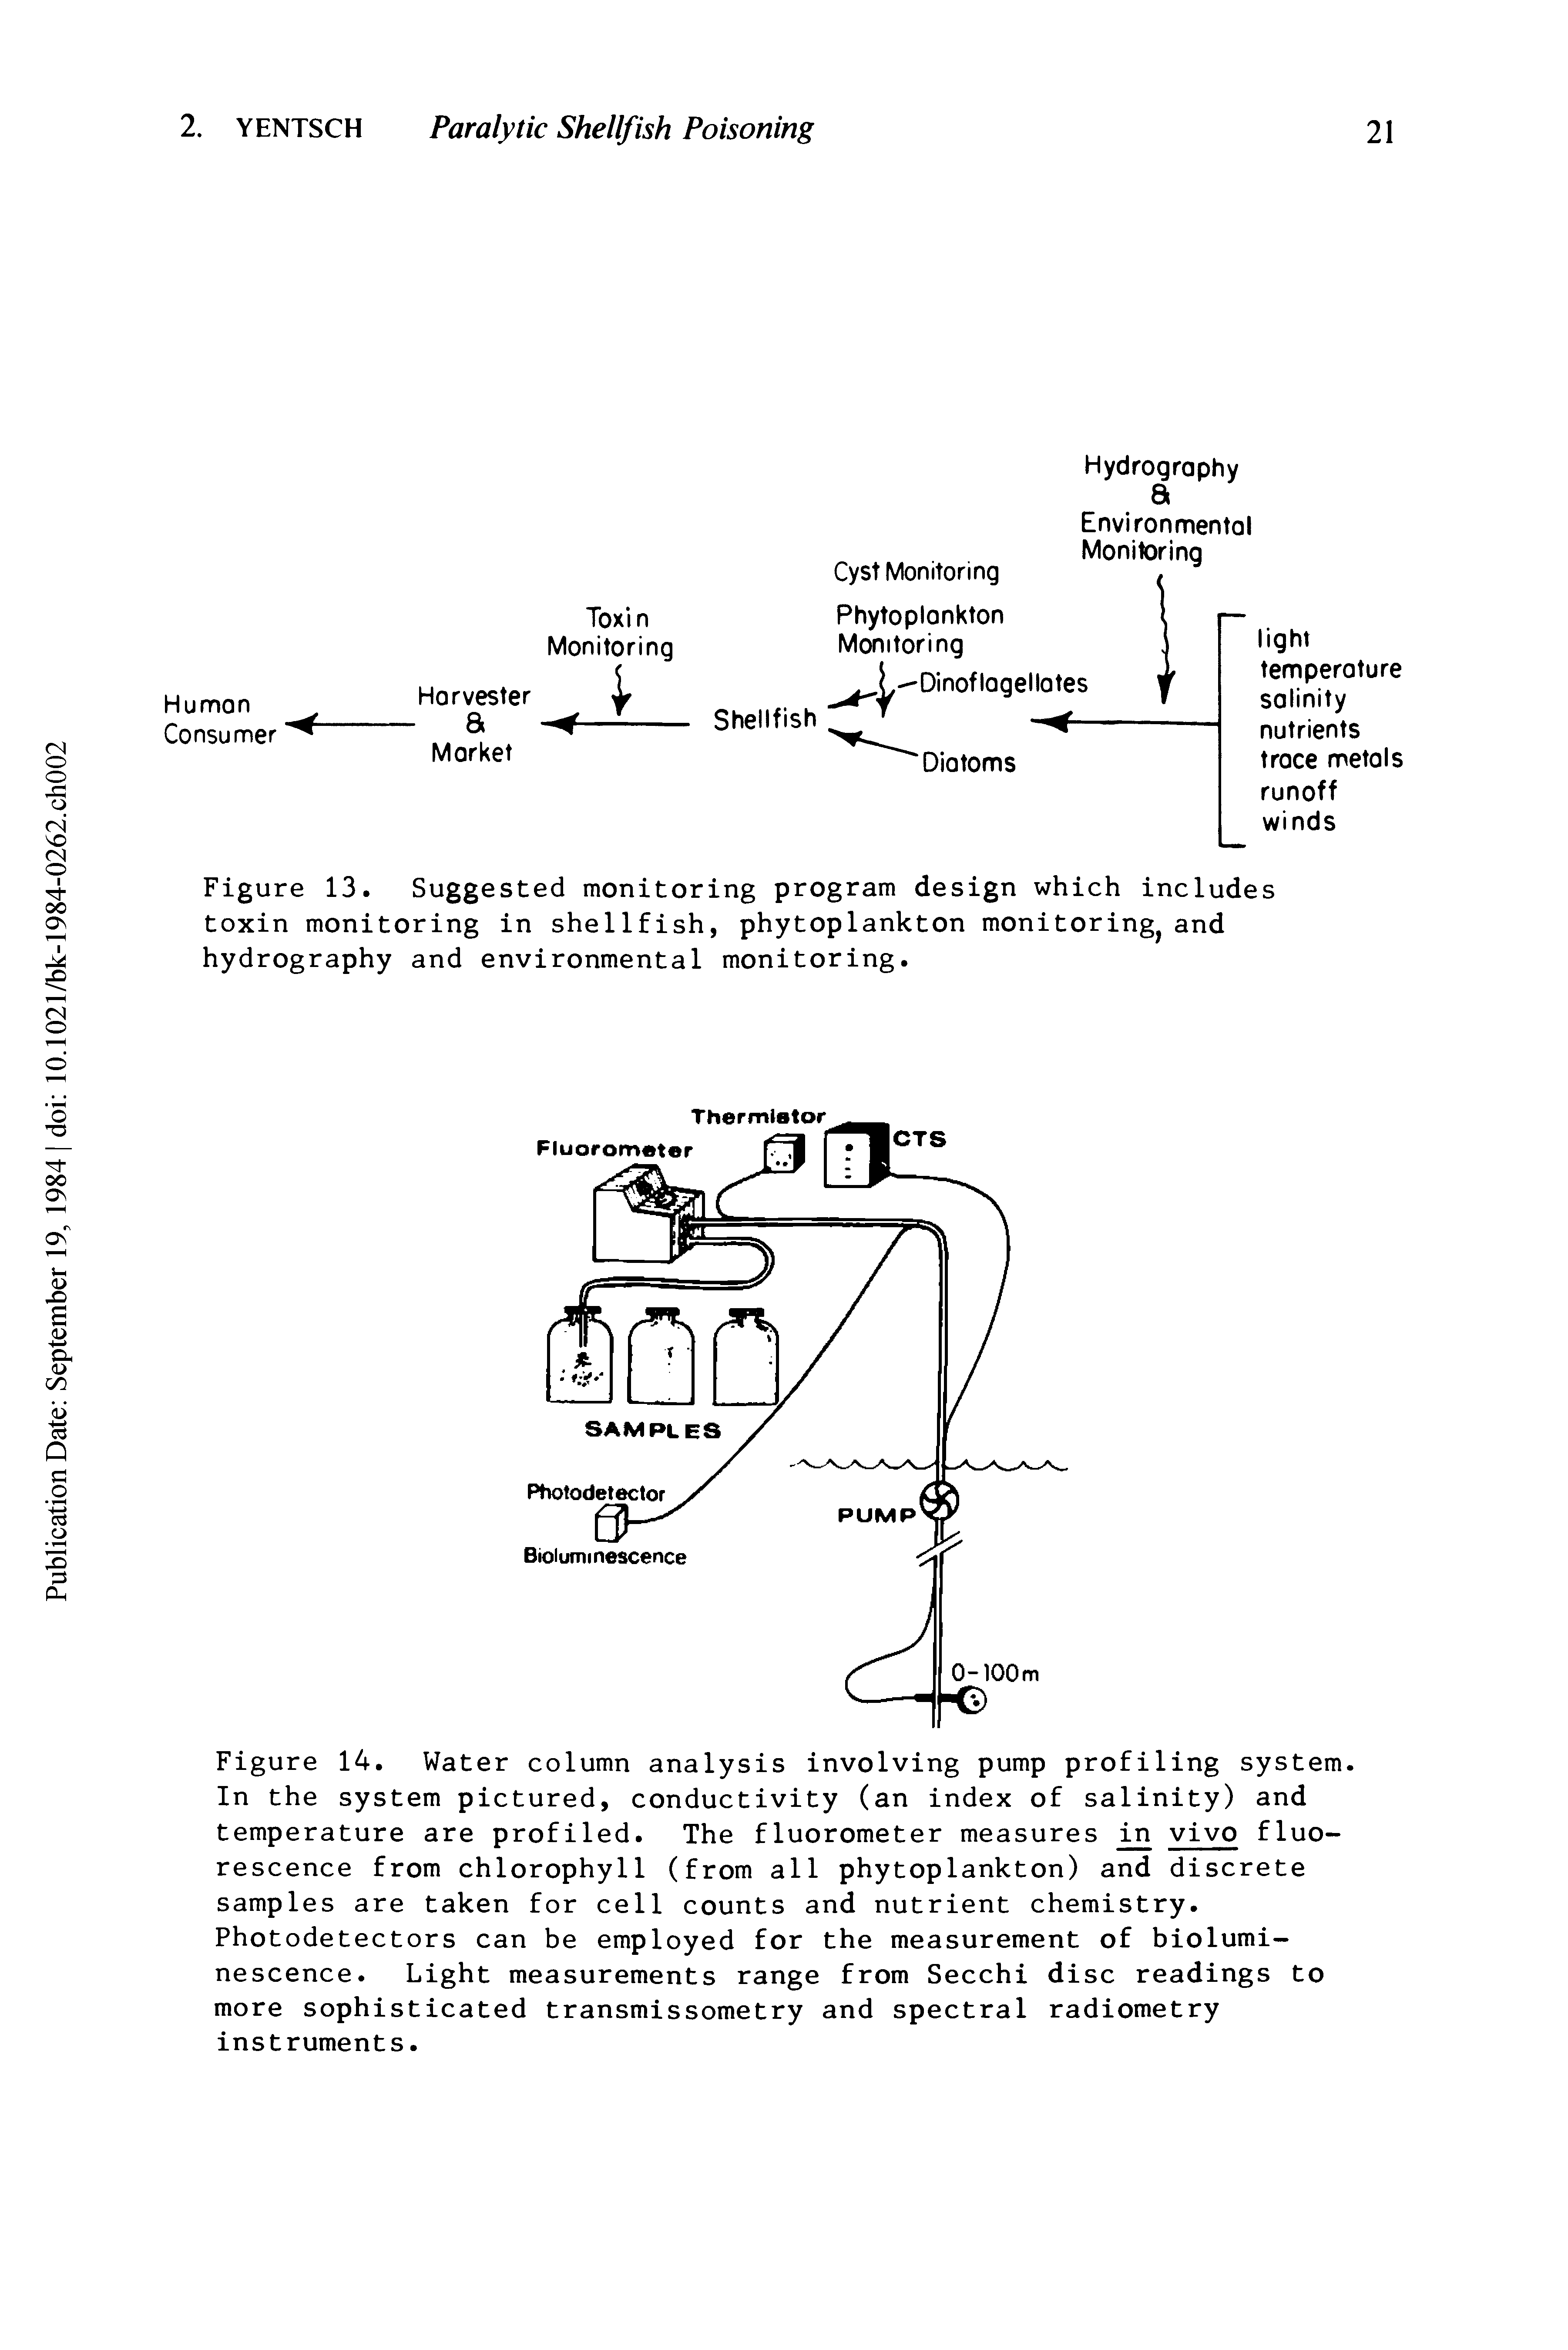 Figure 14. Water column analysis involving pump profiling system. In the system pictured, conductivity (an index of salinity) and temperature are profiled. The fluorometer measures ij vivo fluorescence from chlorophyll (from all phytoplankton) and discrete samples are taken for cell counts and nutrient chemistry. Photodetectors can be employed for the measurement of bioluminescence. Light measurements range from Secchi disc readings to more sophisticated transmissometry and spectral radiometry instruments.